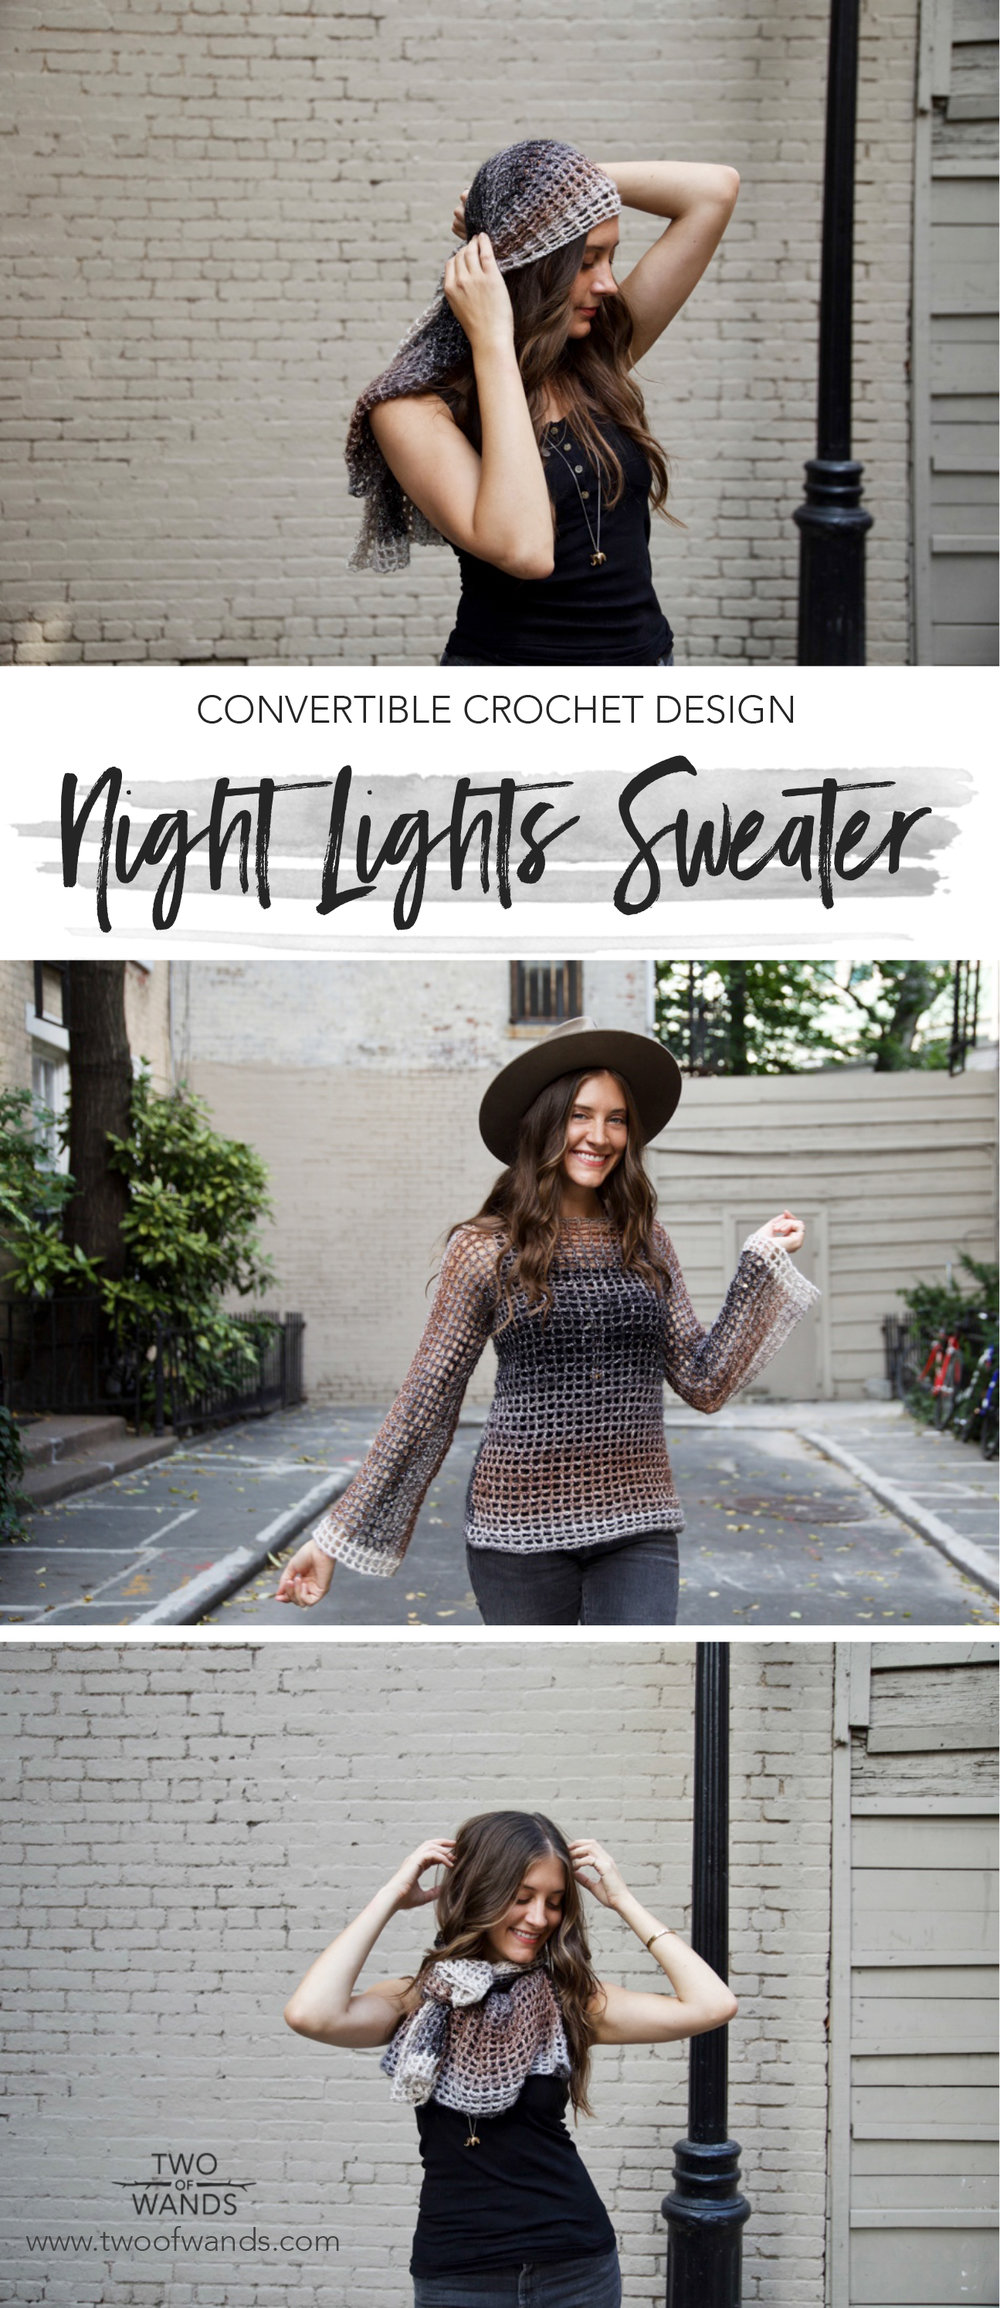 Night Lights Sweater by Two of Wands